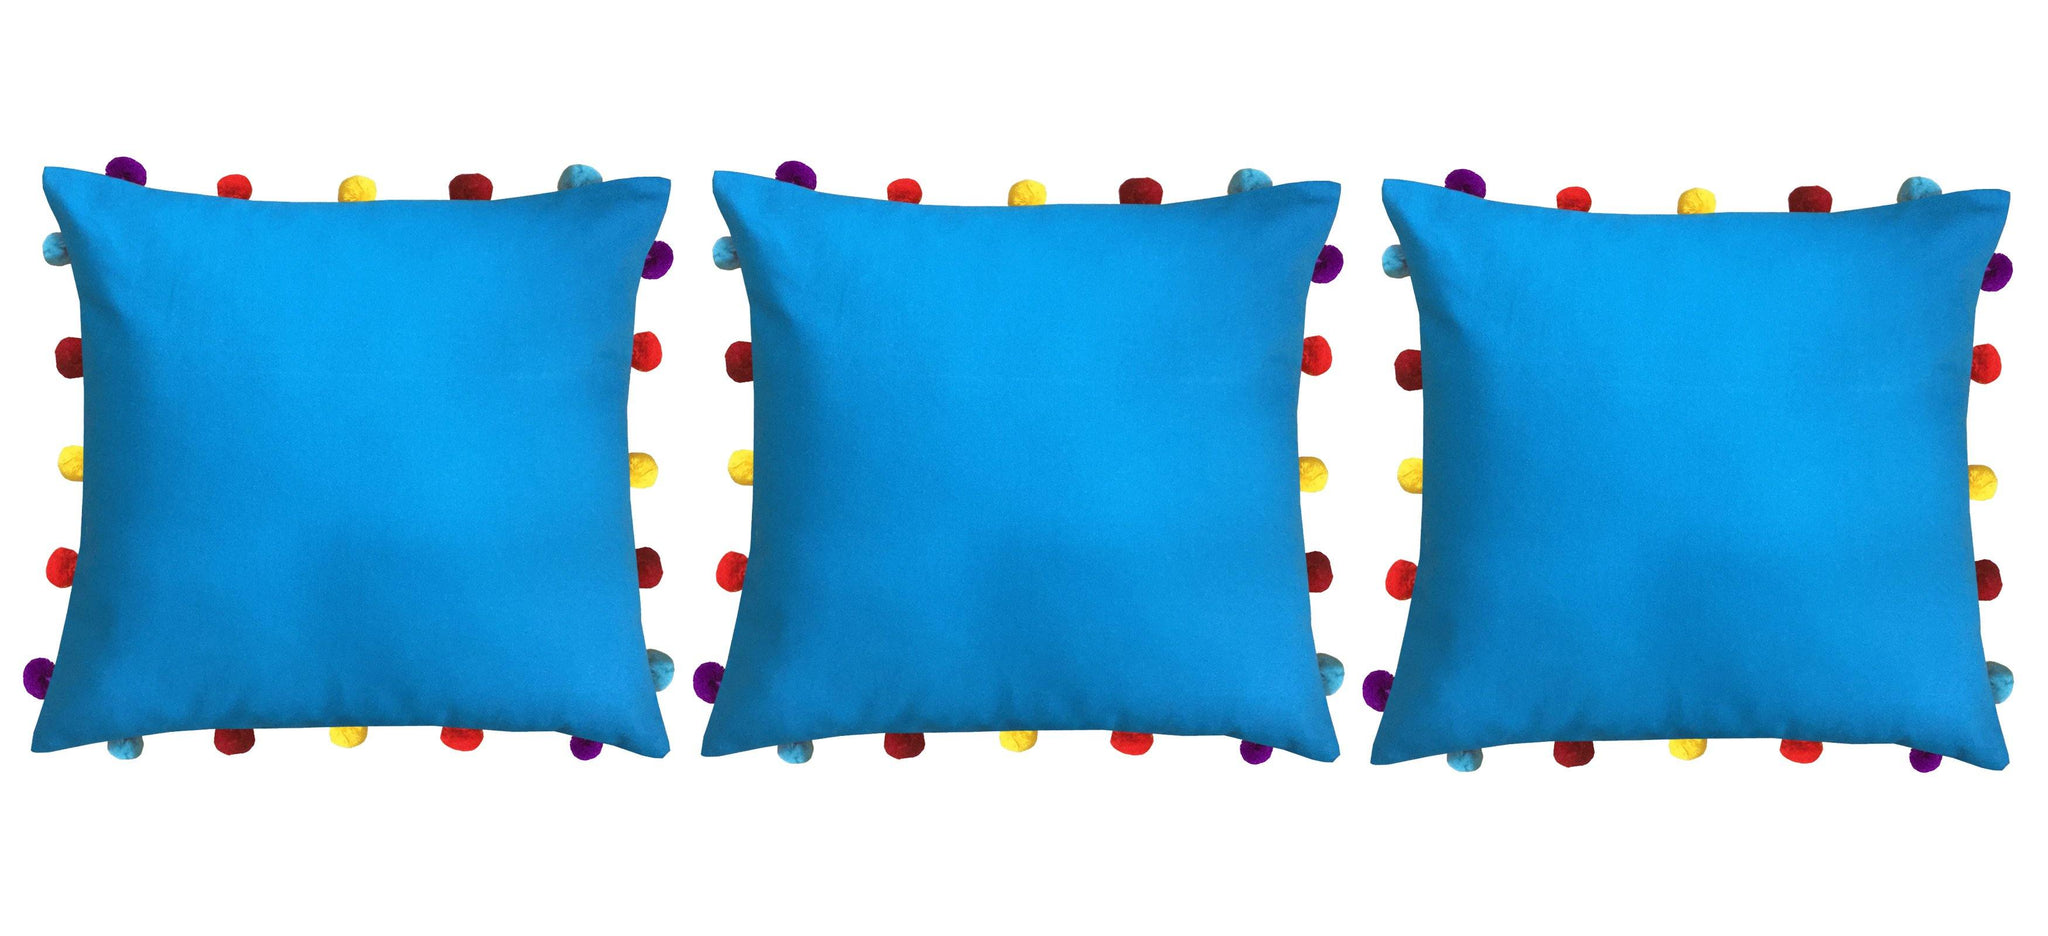 Lushomes Blue Sofa Cushion Cover Online with Colorful Pom Pom (Pack of 3 Pcs, 16 x 16 inches) - Lushomes